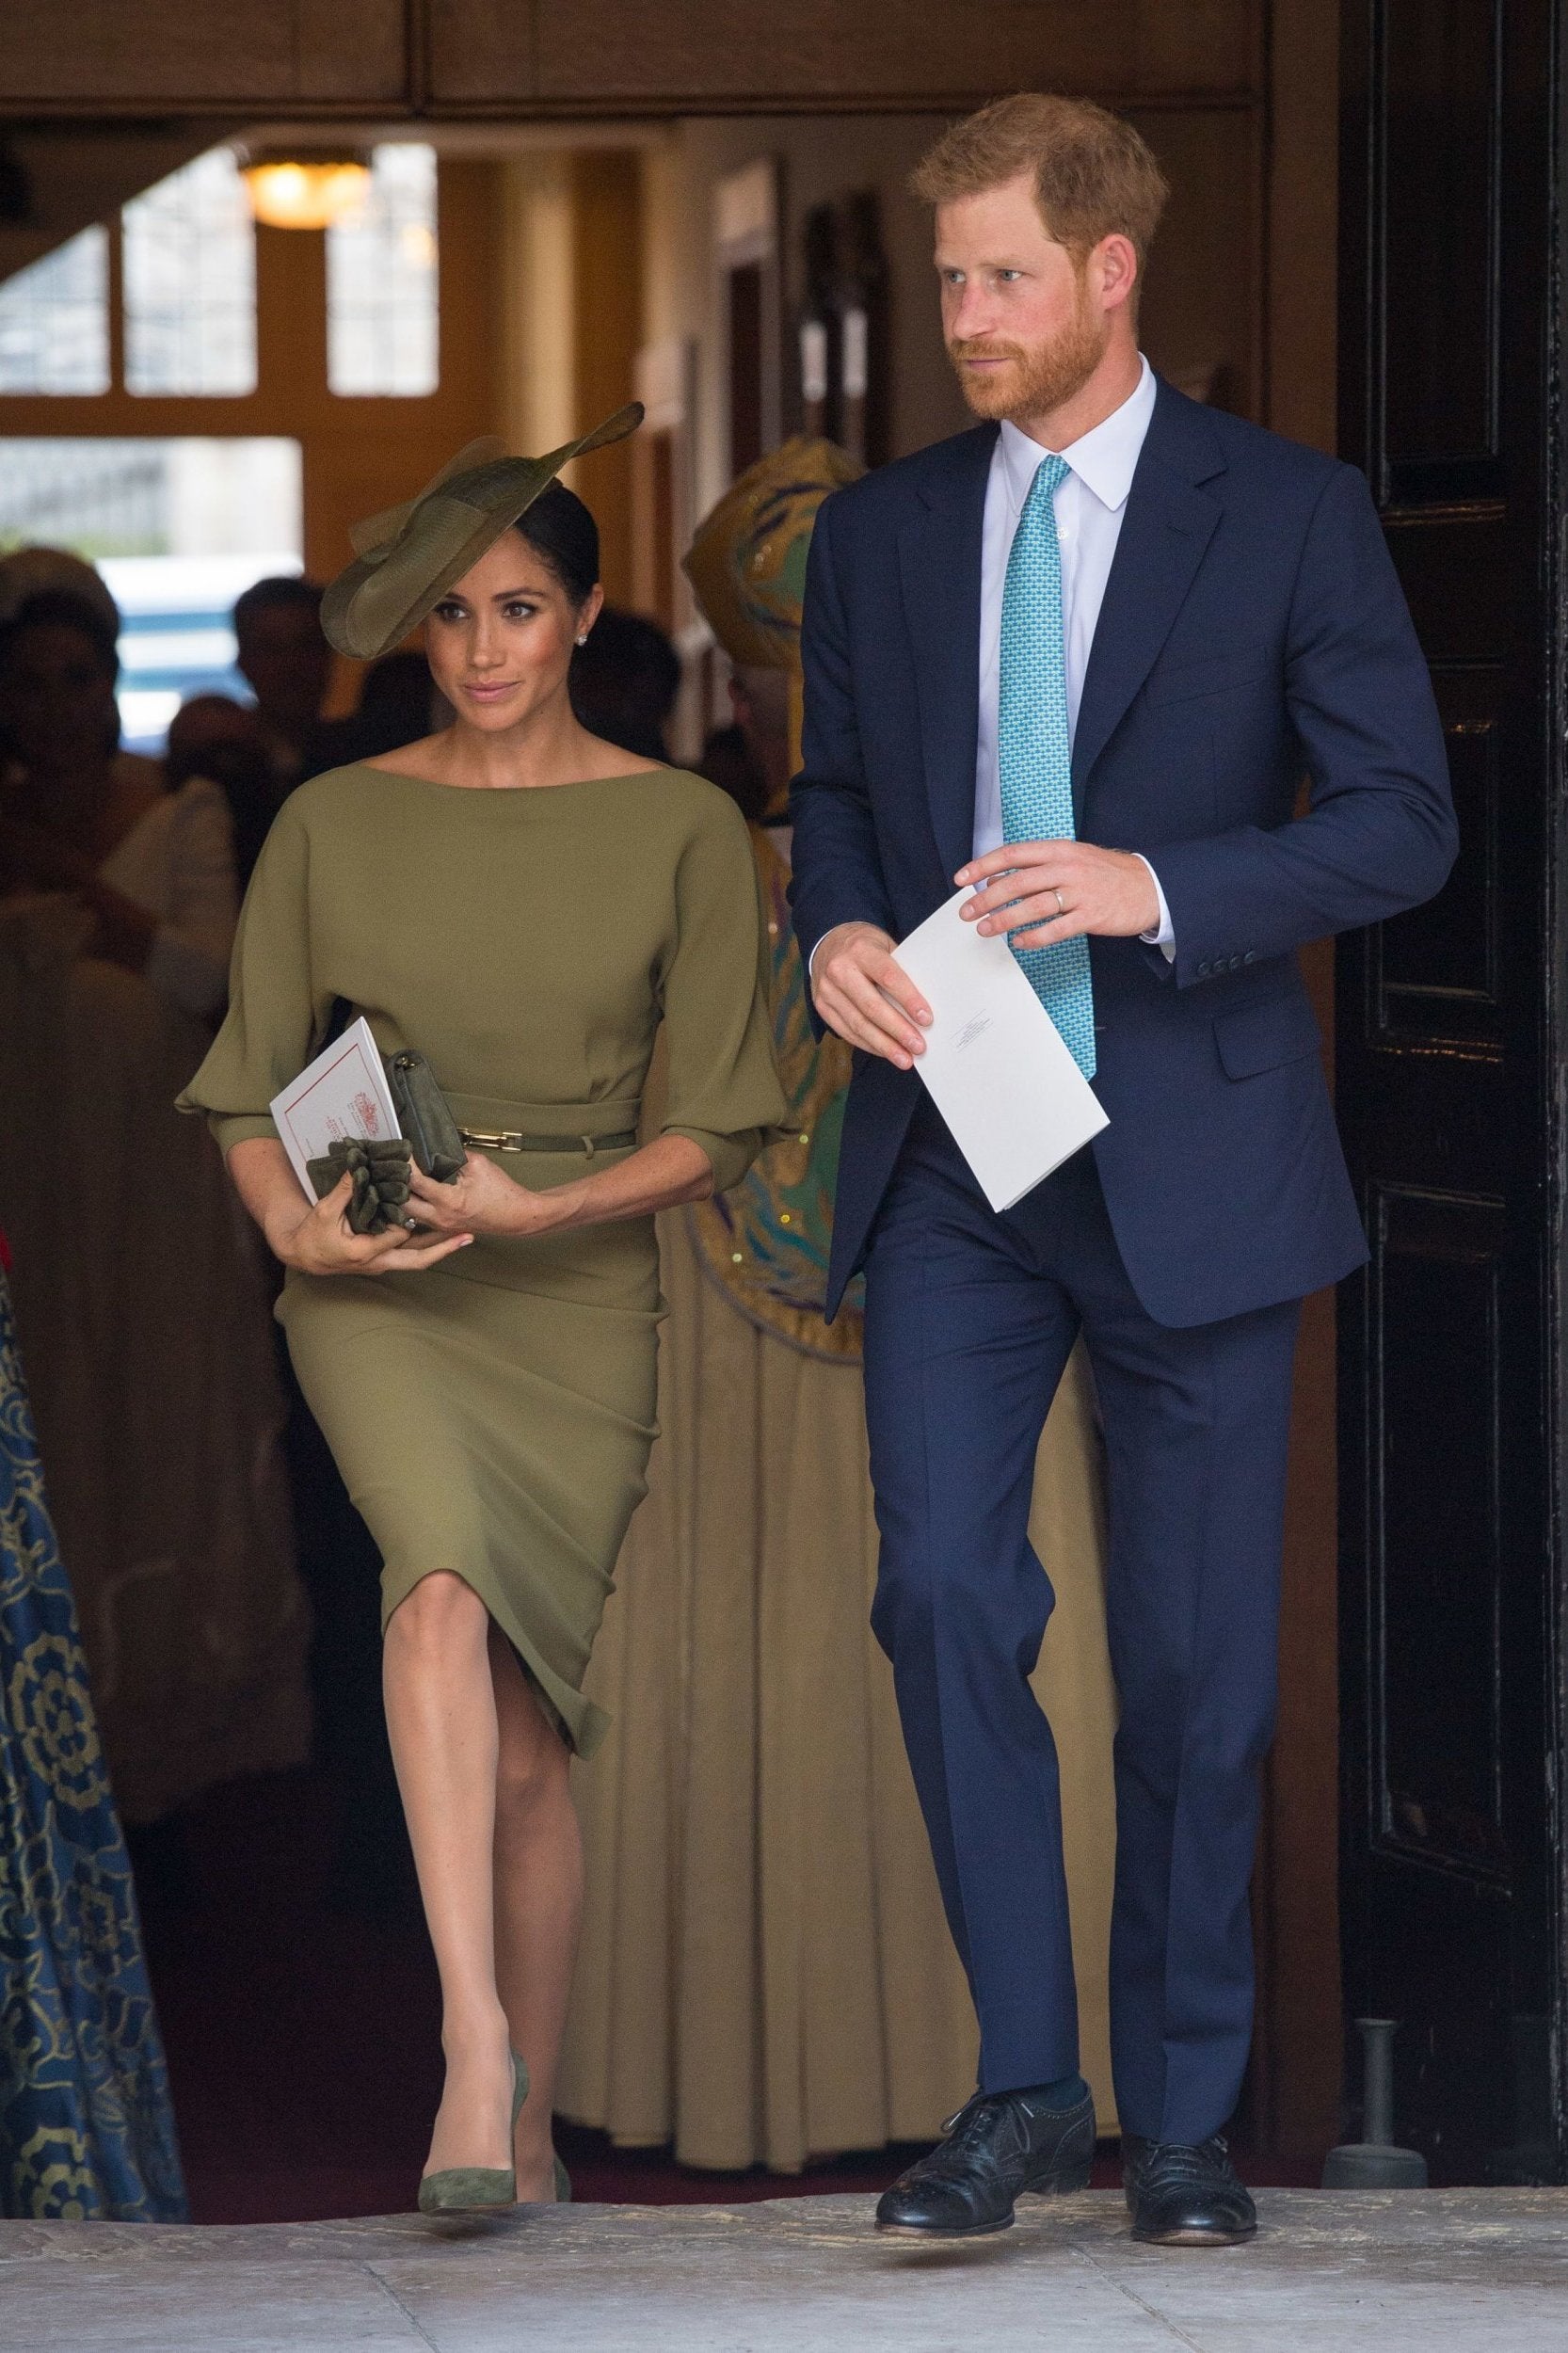 The Duke and Duchess of Sussex pictured leaving the christening of Prince Louis at the Chapel Royal, St James's Palace.